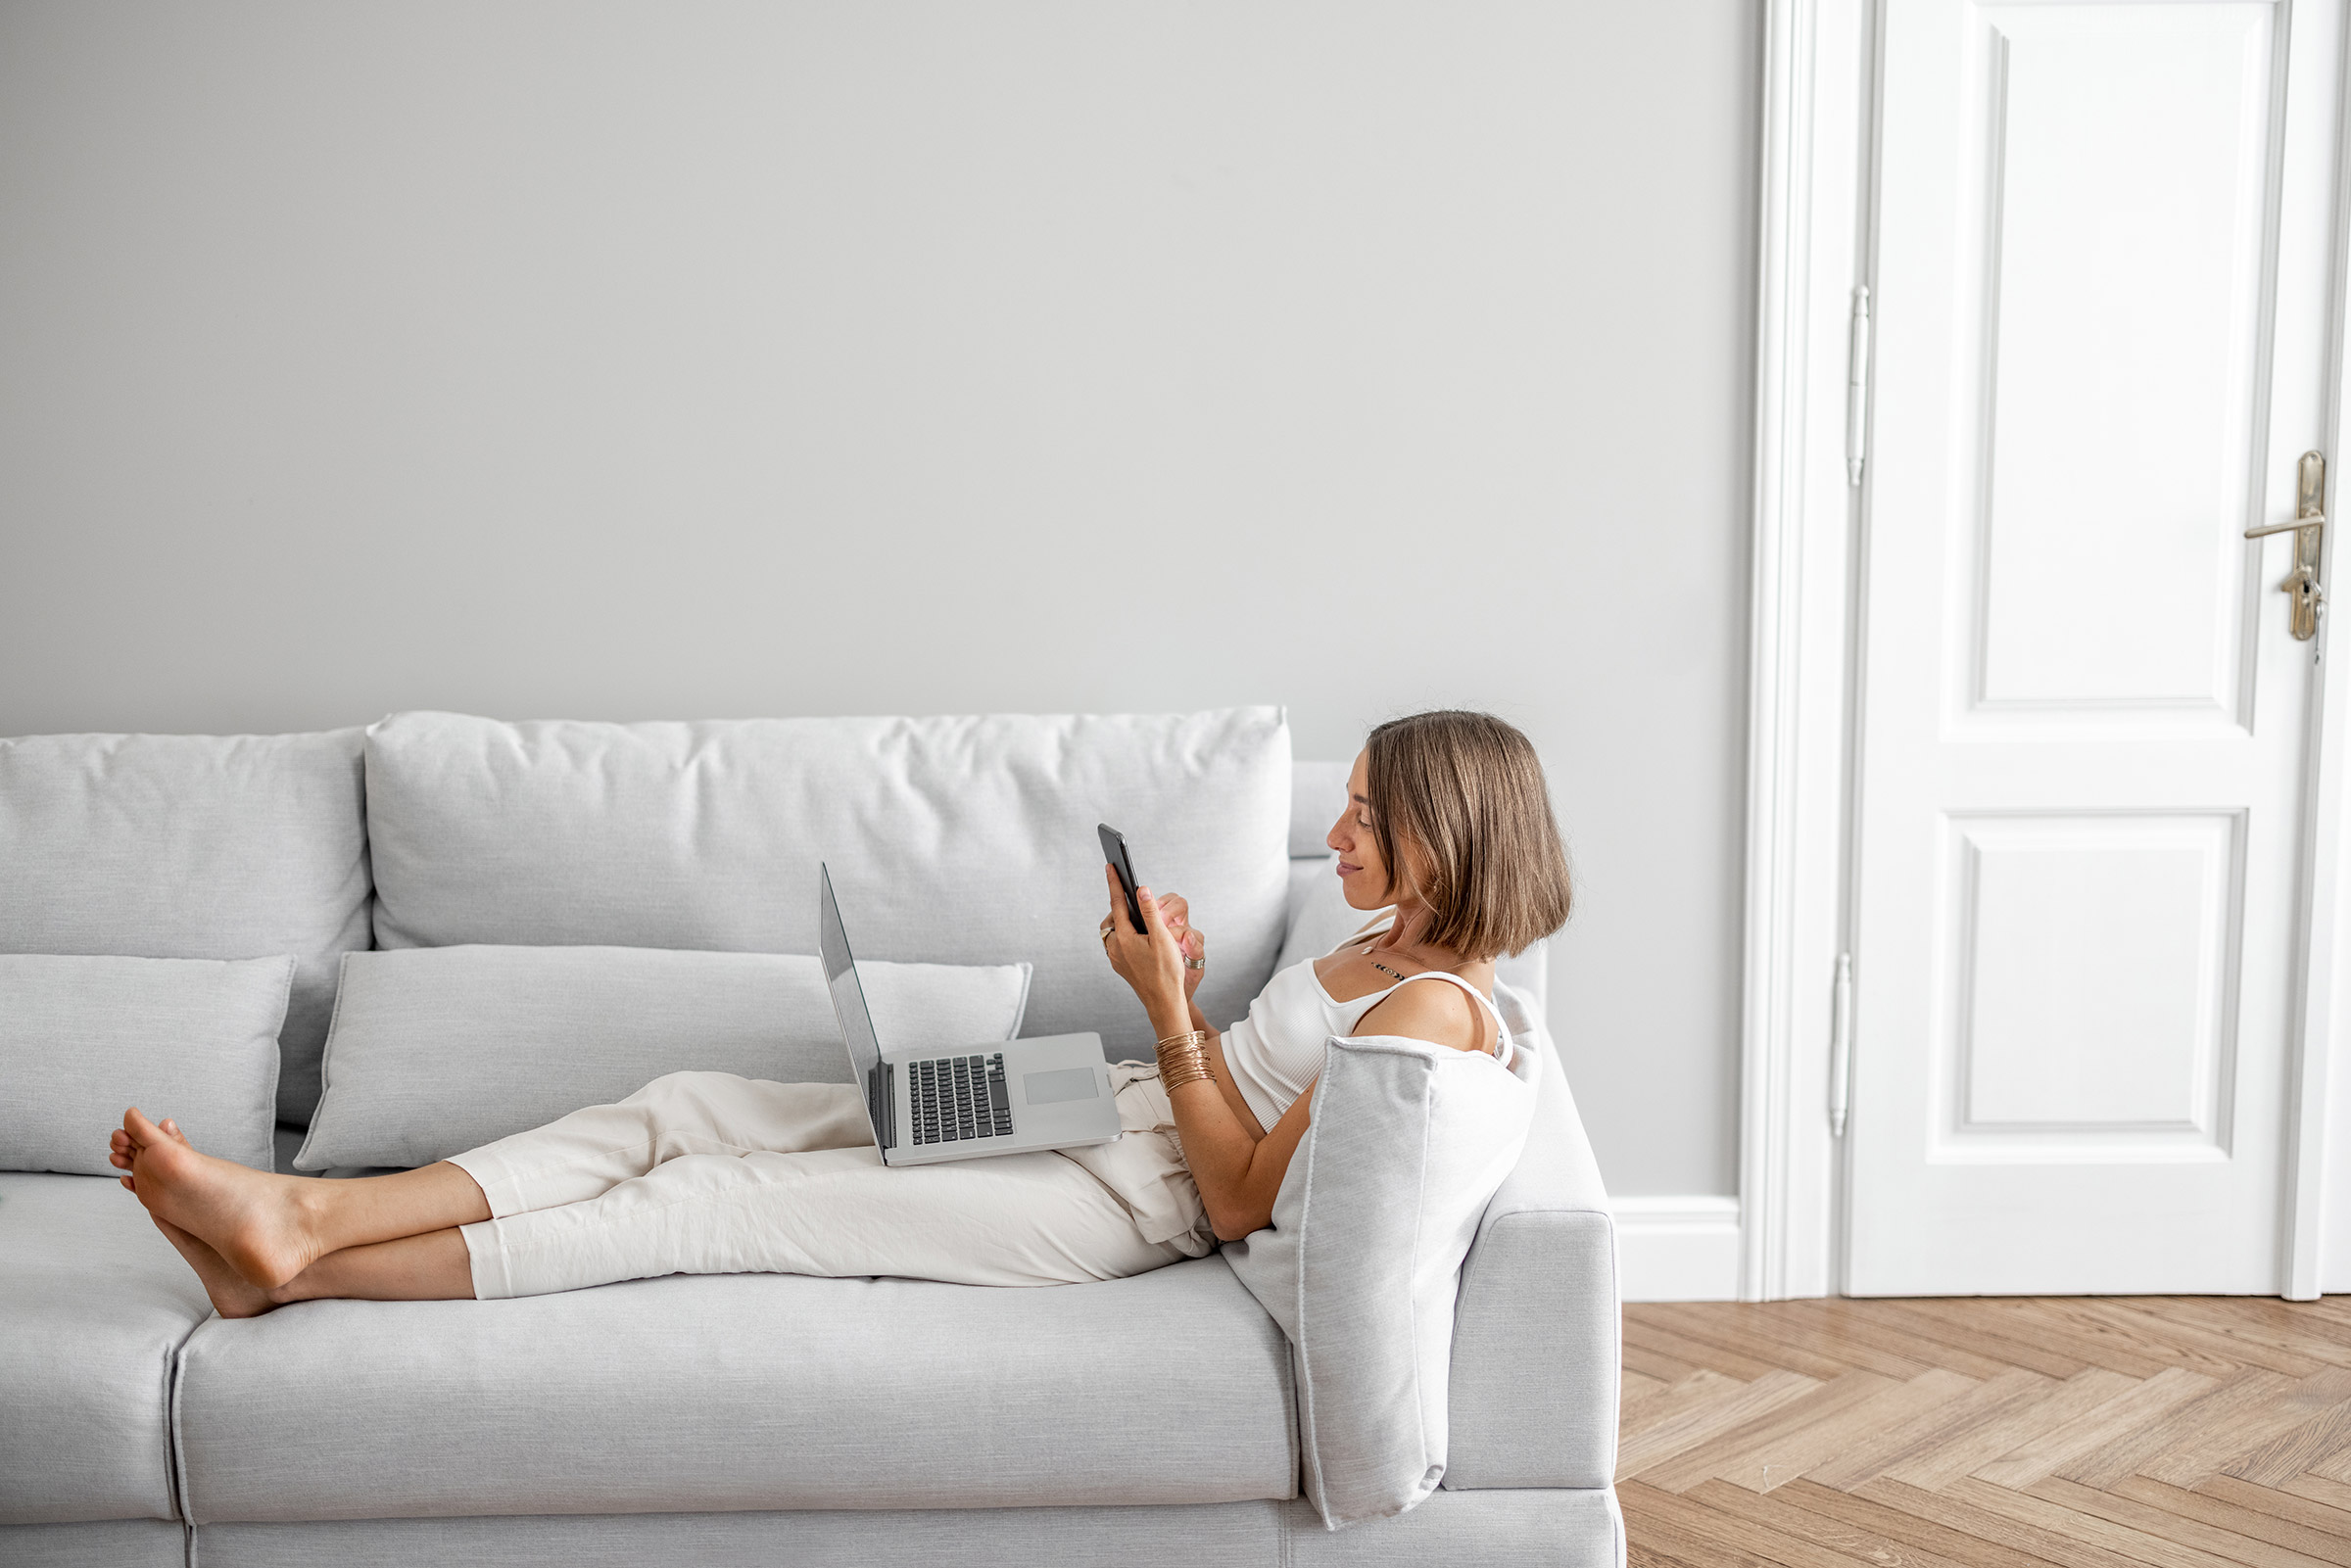 Woman relaxing on couch with laptop and phone